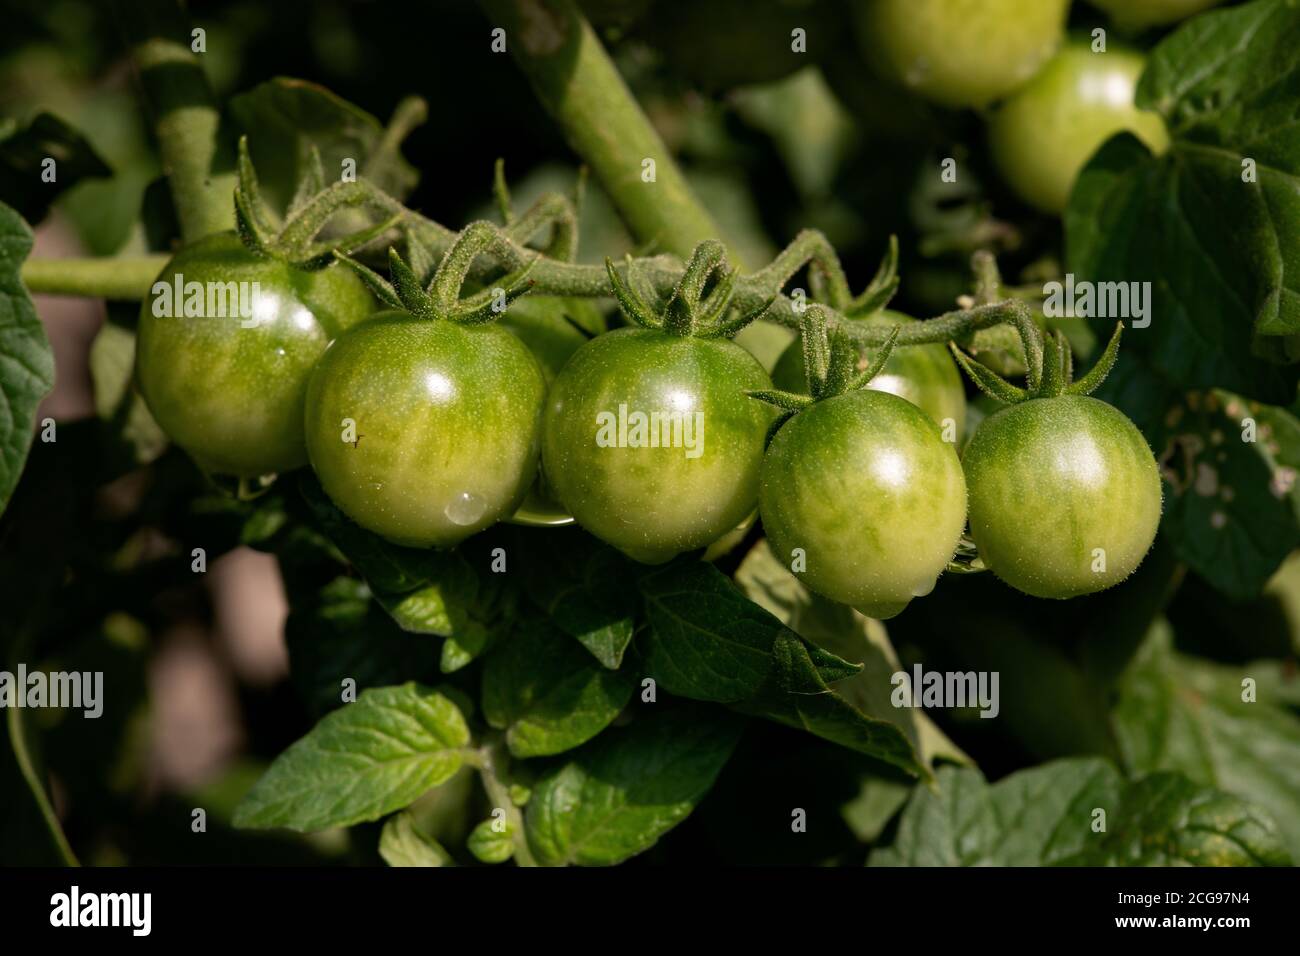 A Bunch of garden Unripened Green Tomatoes on the Vine Stock Photo